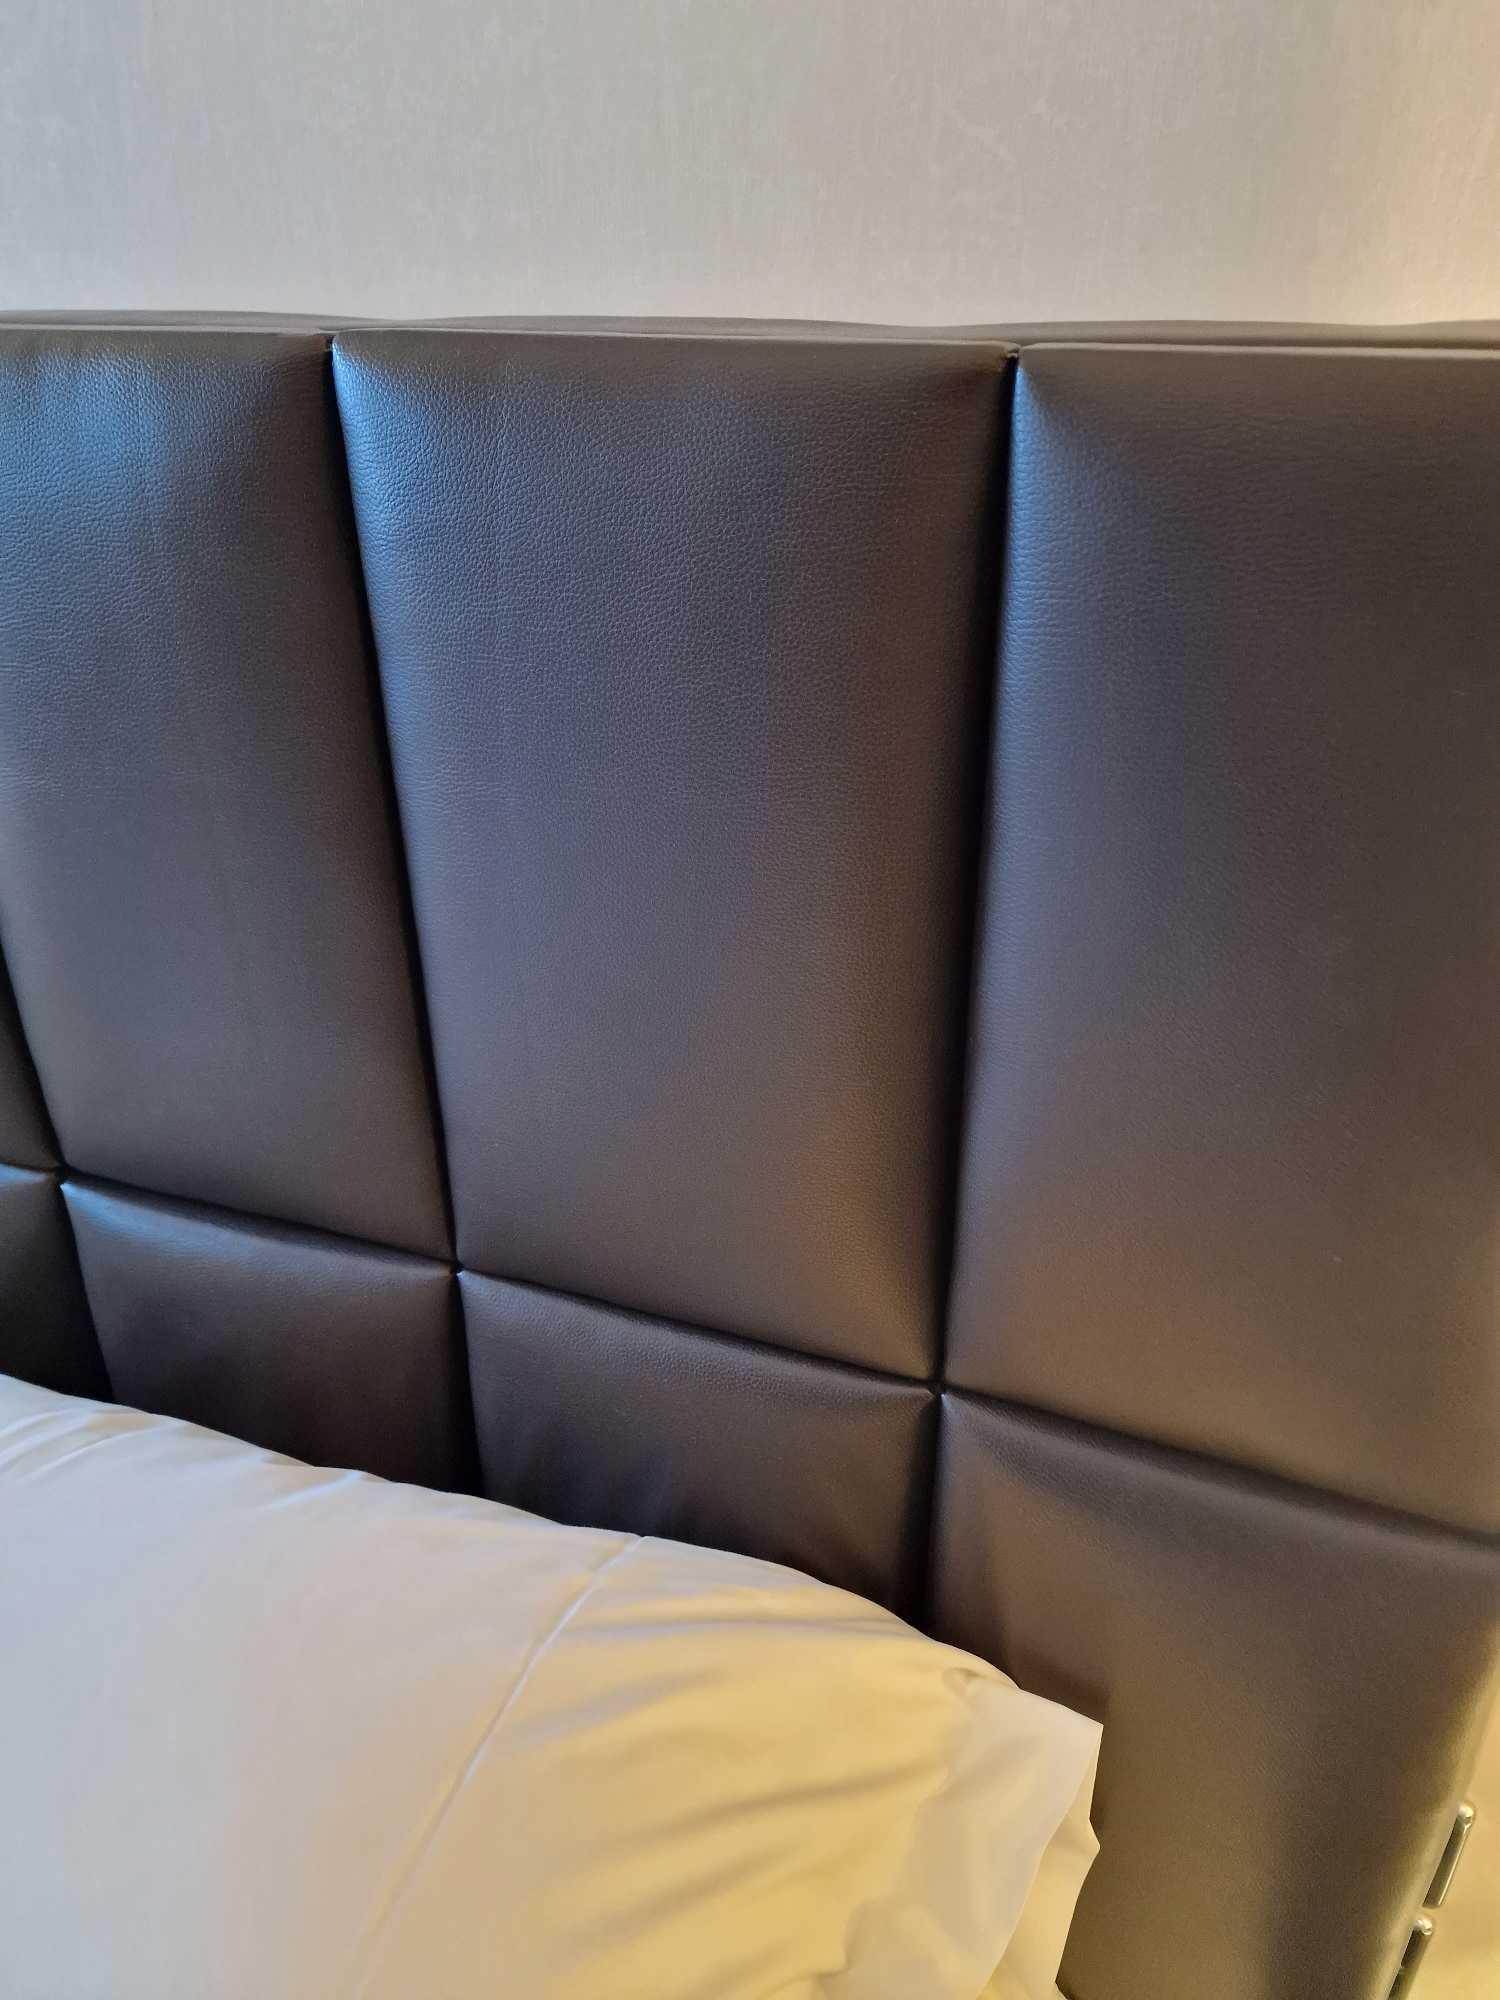 Zip and Link Superking bed, divan base and leather headboard Cheval Residence mattress 1300 - Image 3 of 3